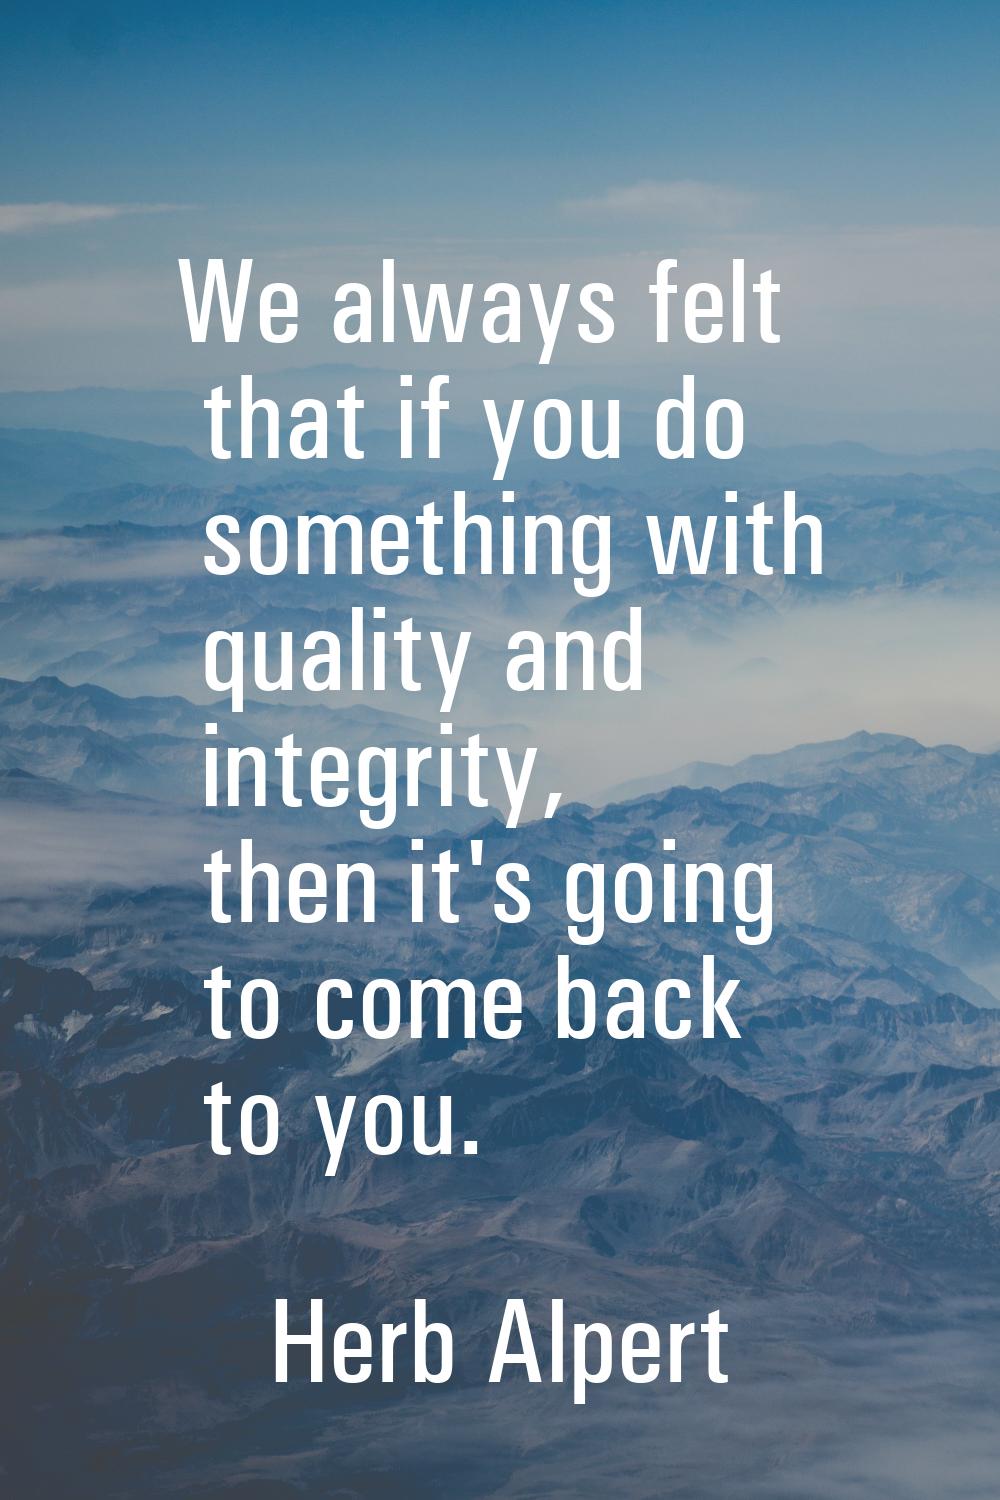 We always felt that if you do something with quality and integrity, then it's going to come back to